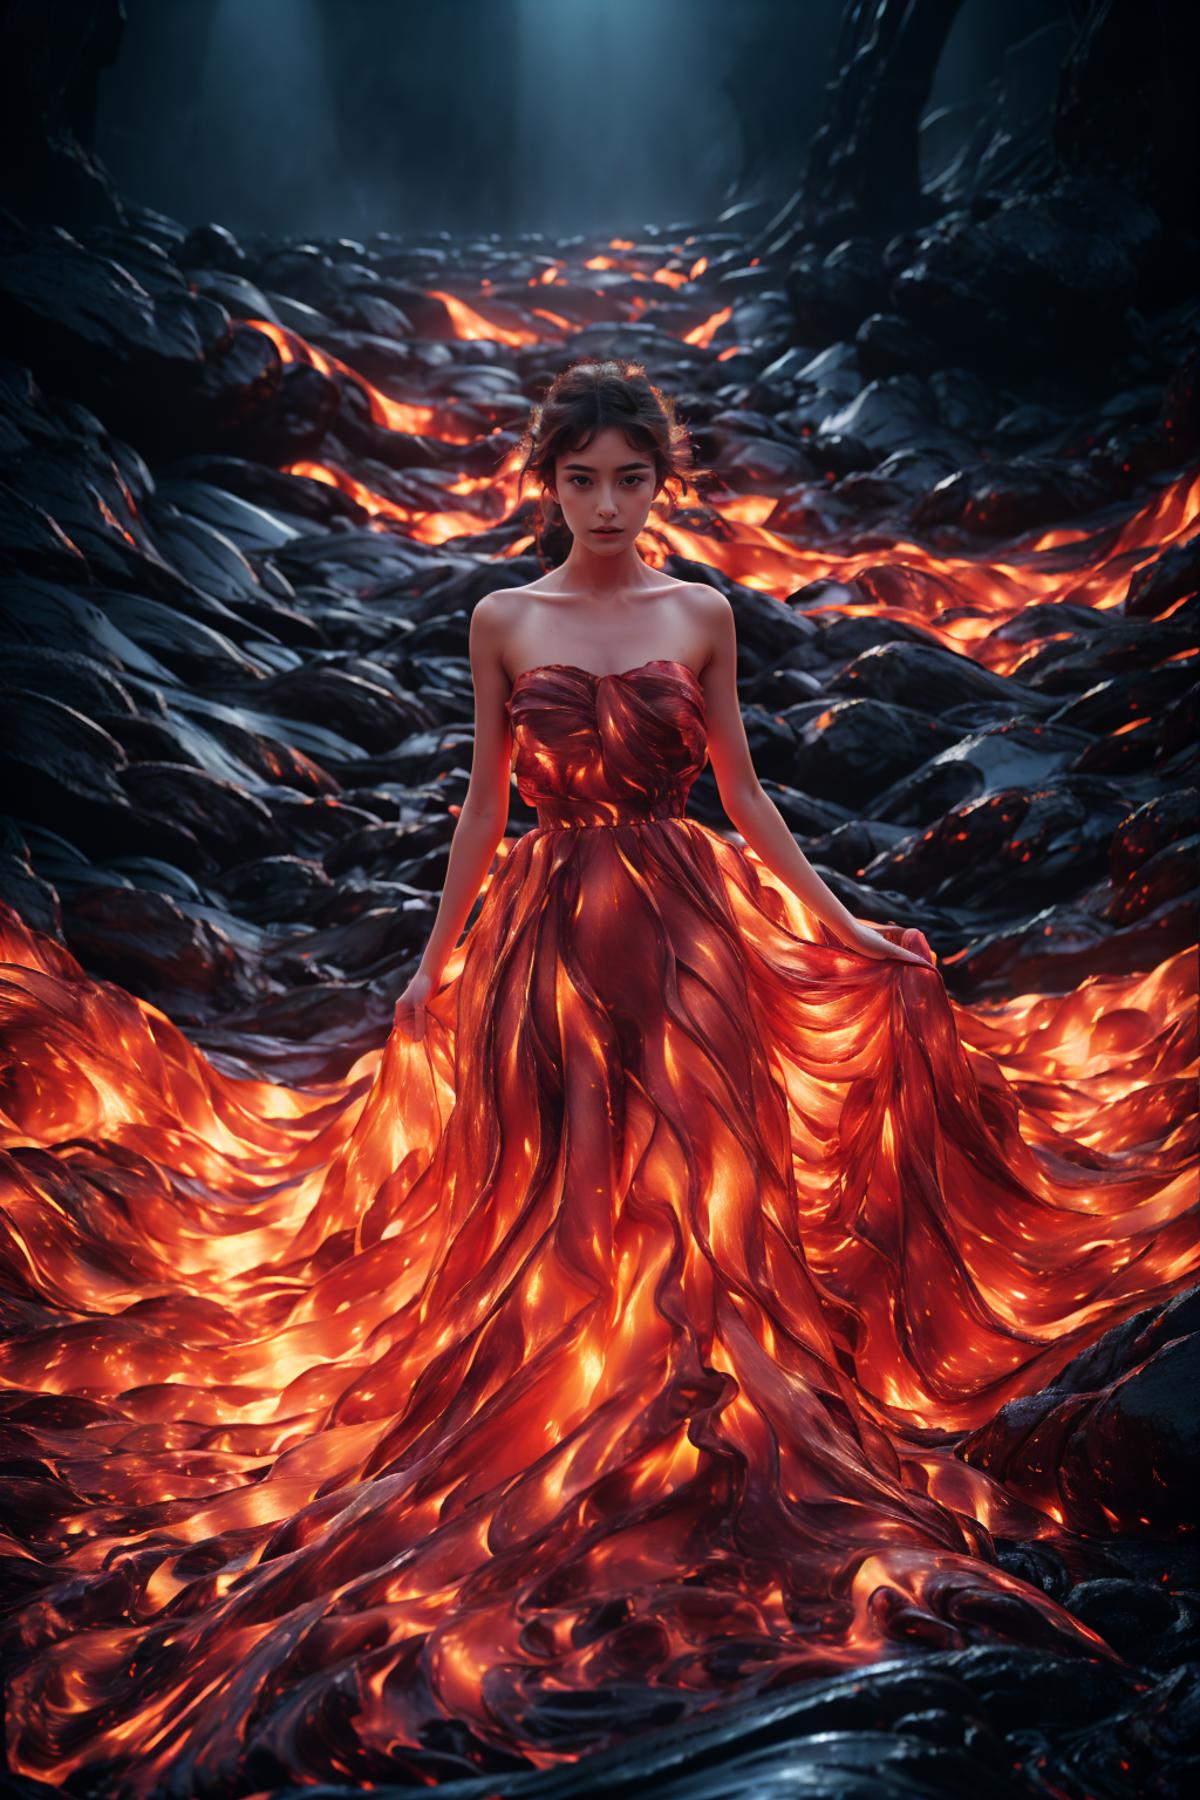 A woman wearing a red dress poses in front of a fiery lava flow.